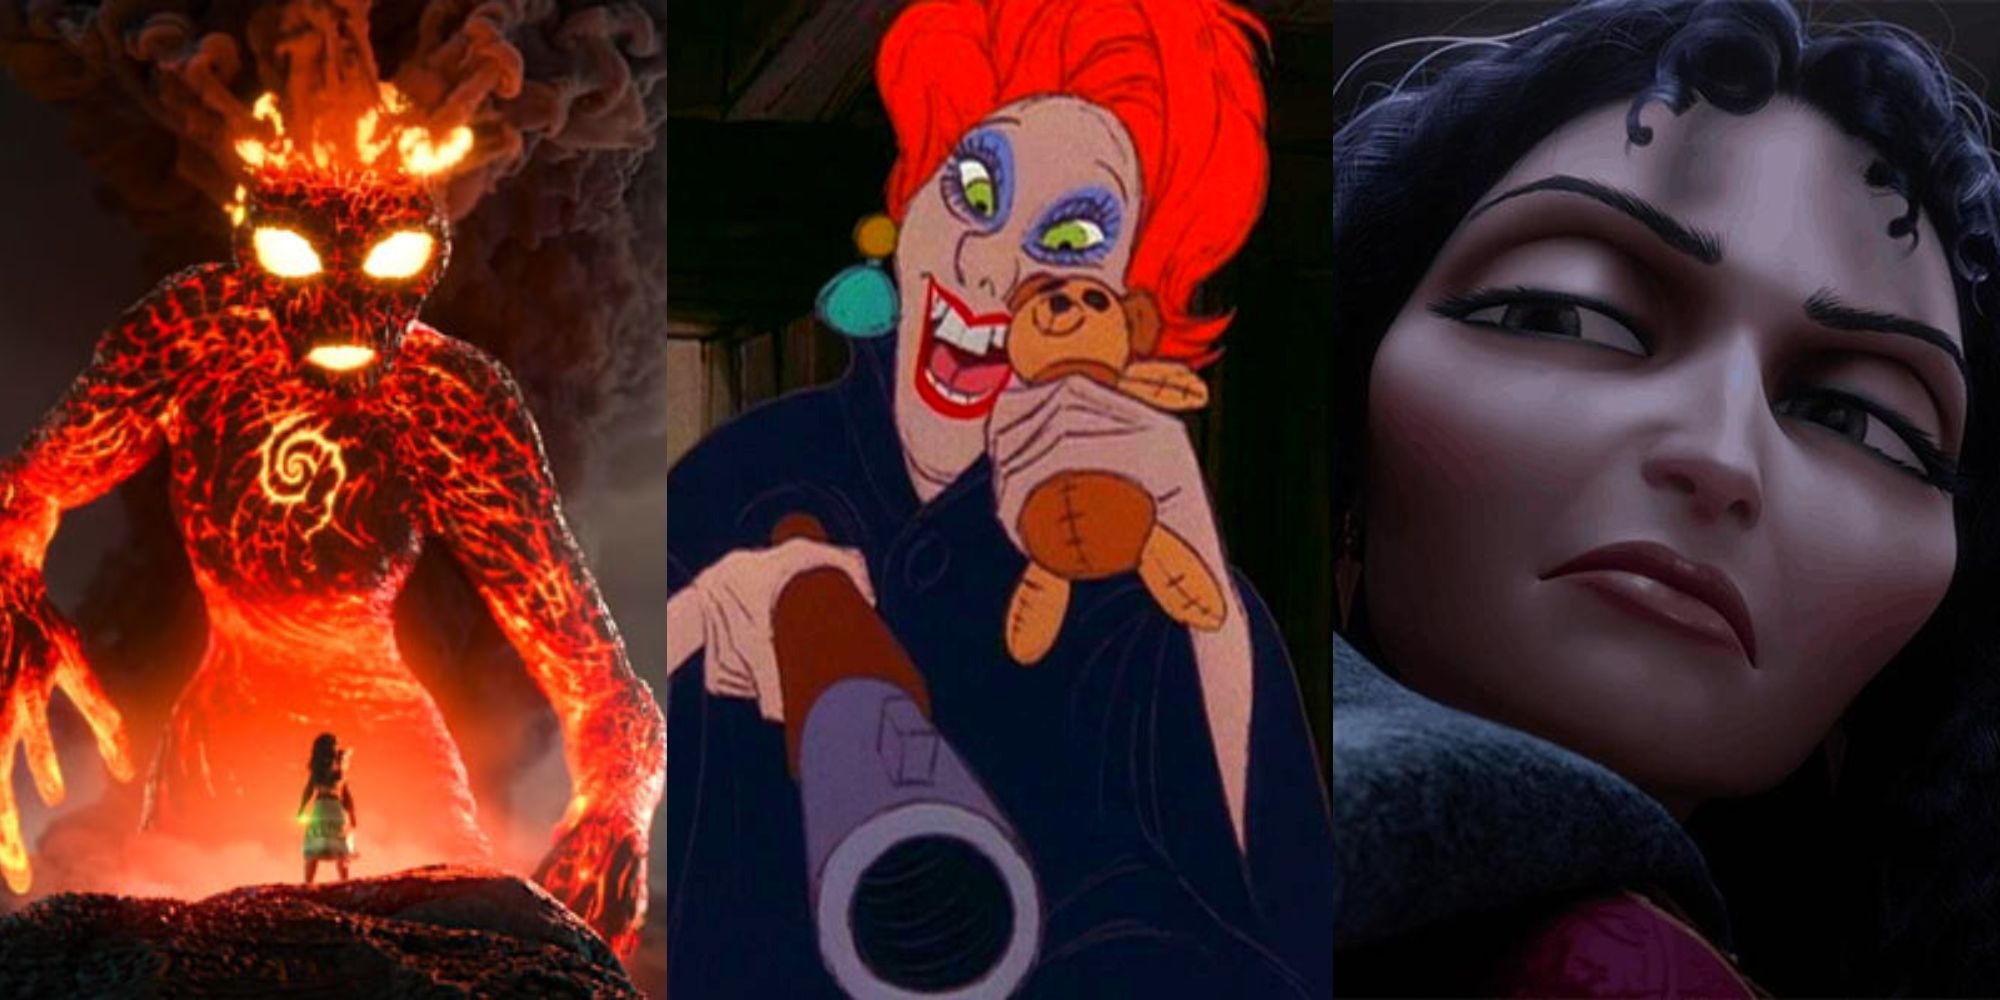 Te Ka and Moana in Moana, Madame Medusa in The Rescuers, Mother Gothel in Tangled